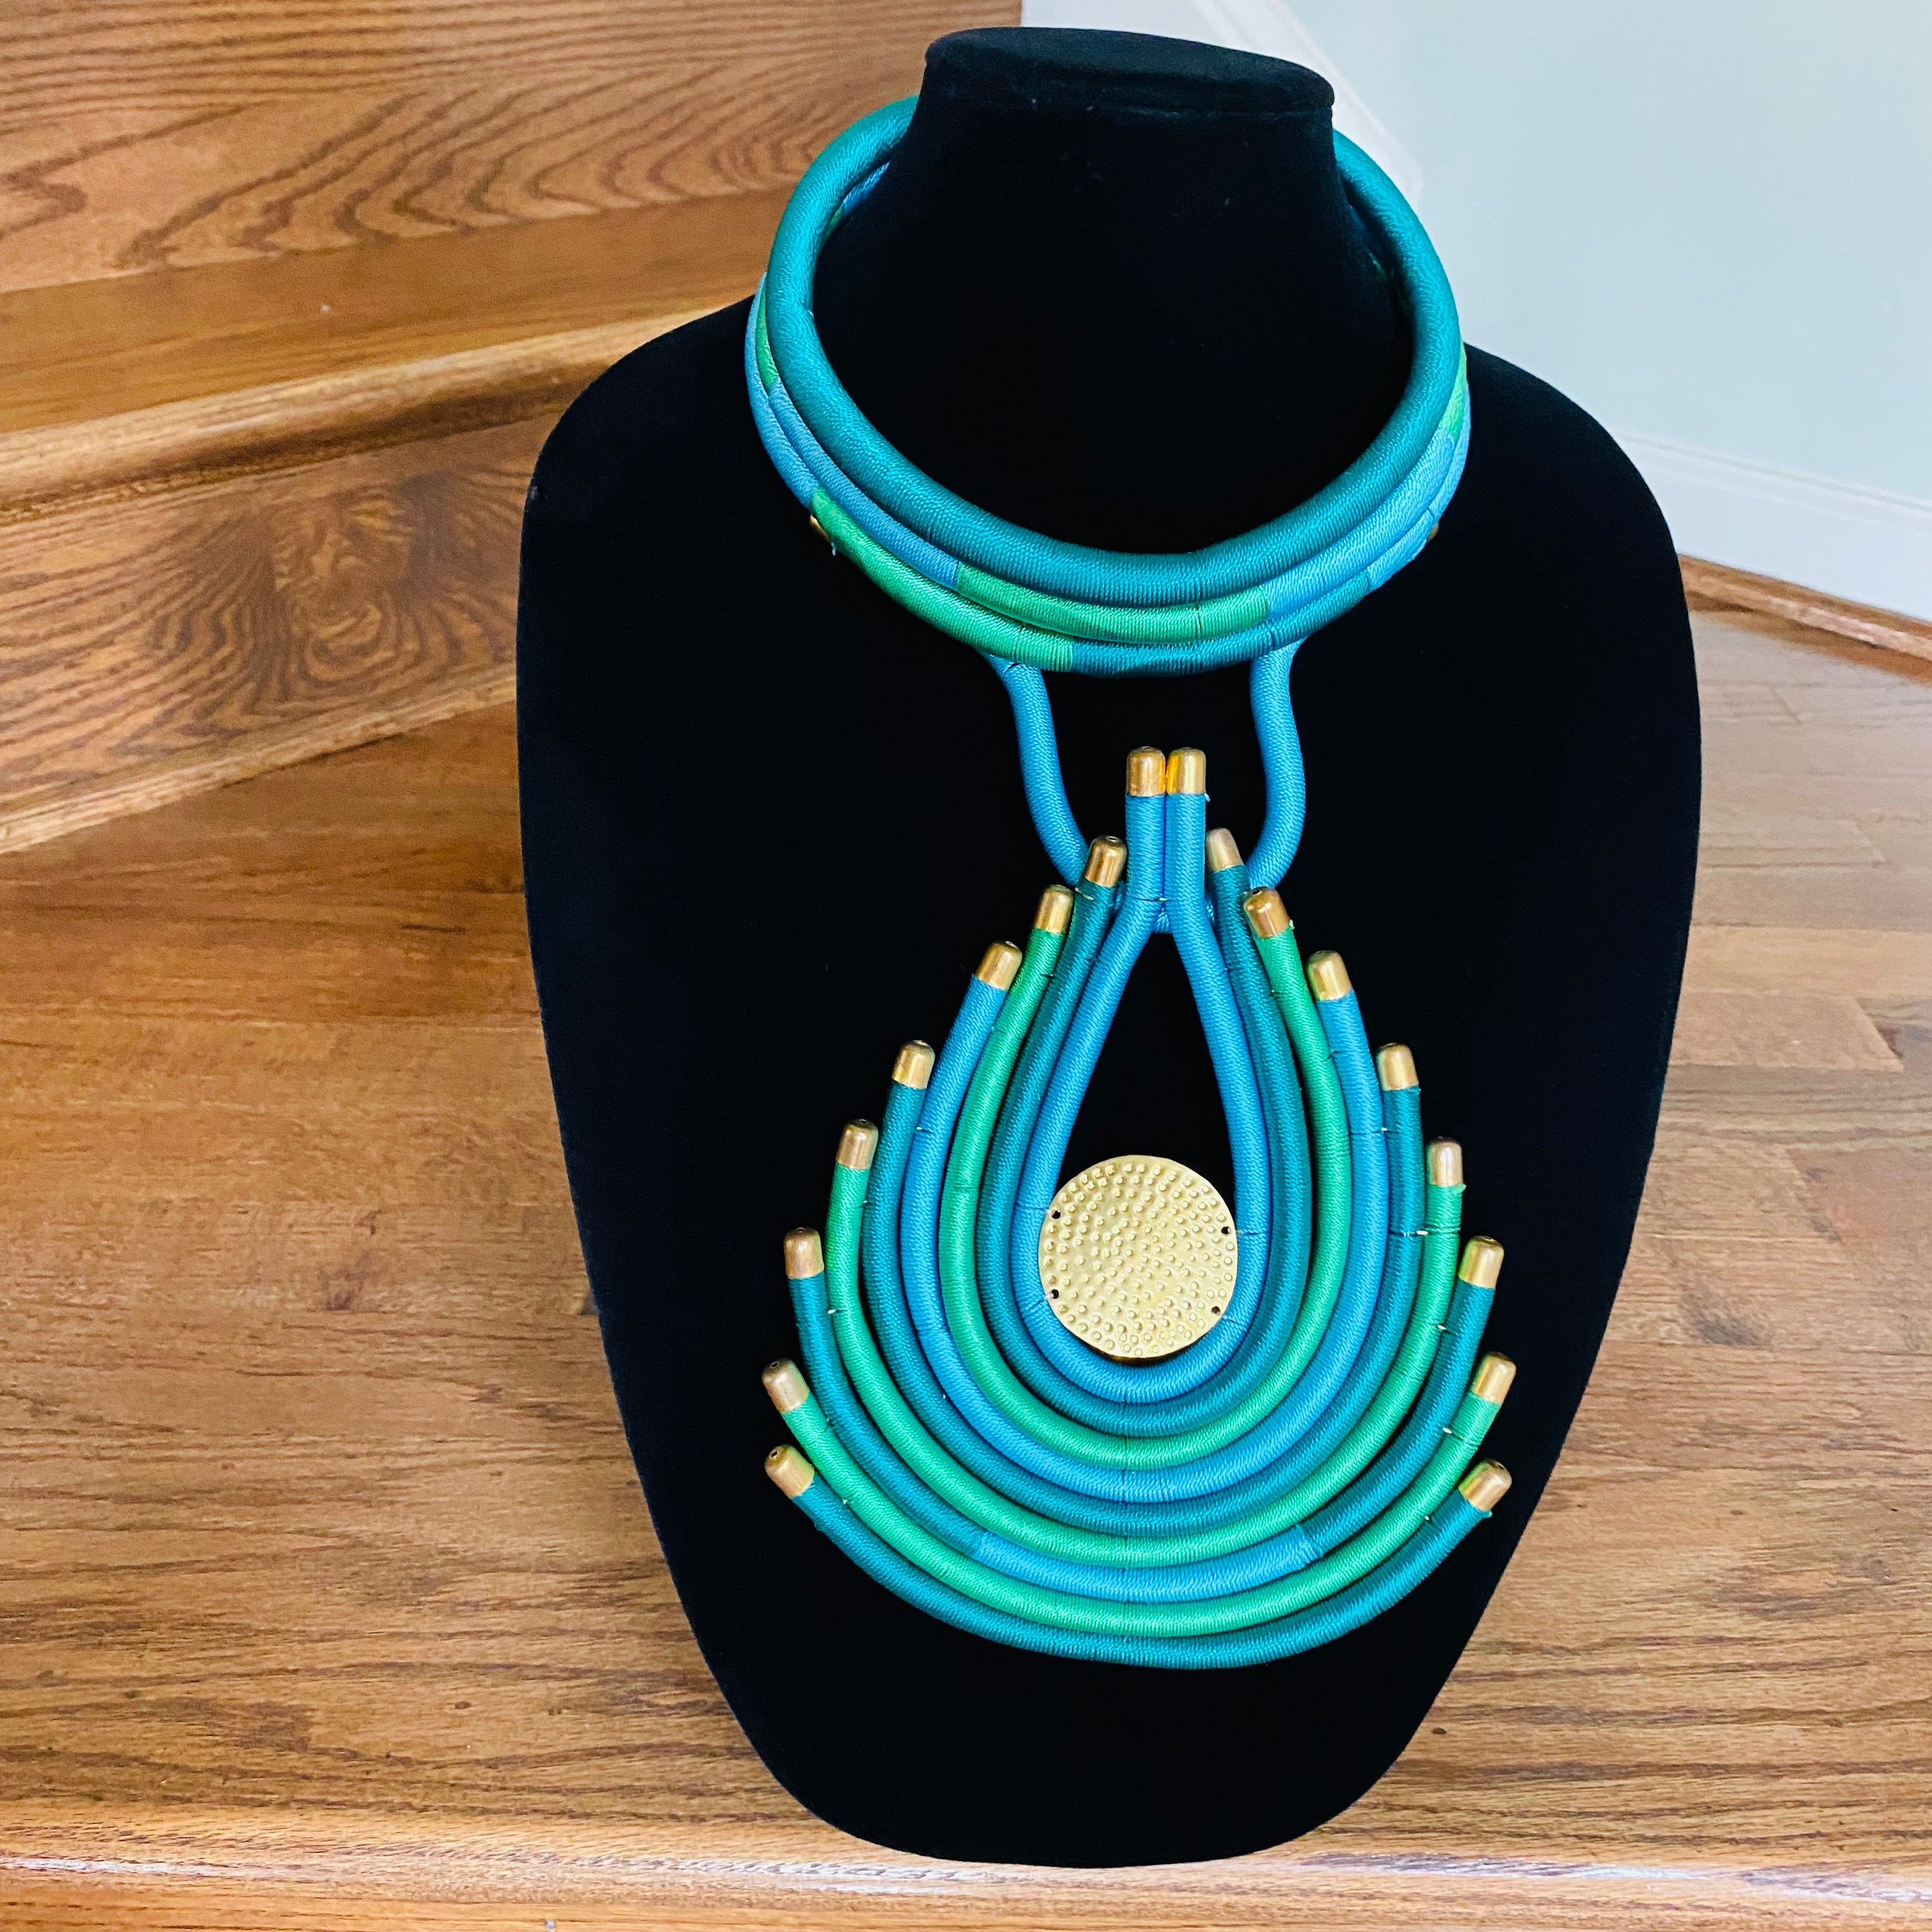 The Swahili Necklaces